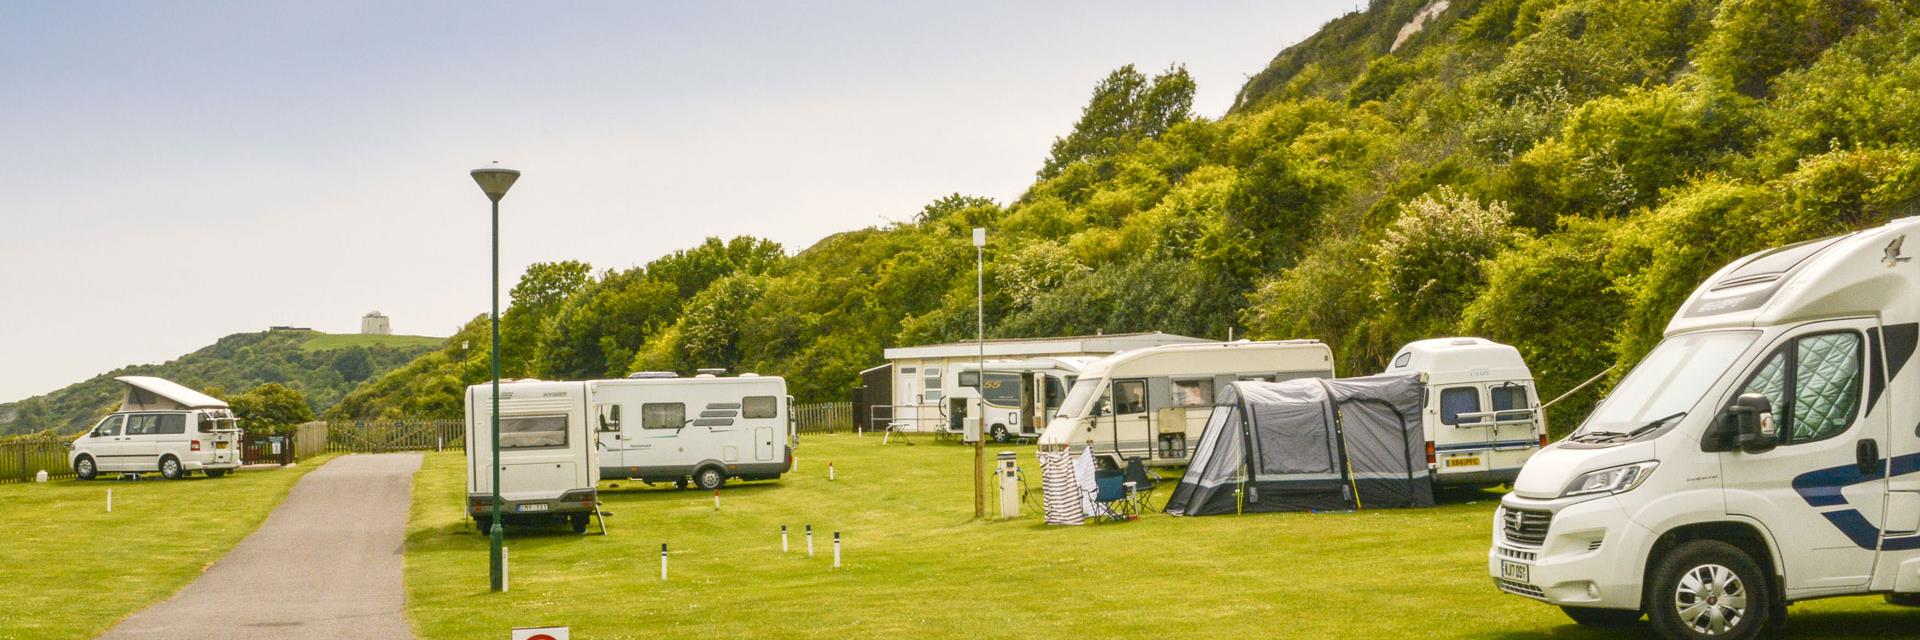 Camping-Mitgliedschaft in Großbritannien - The Camping and